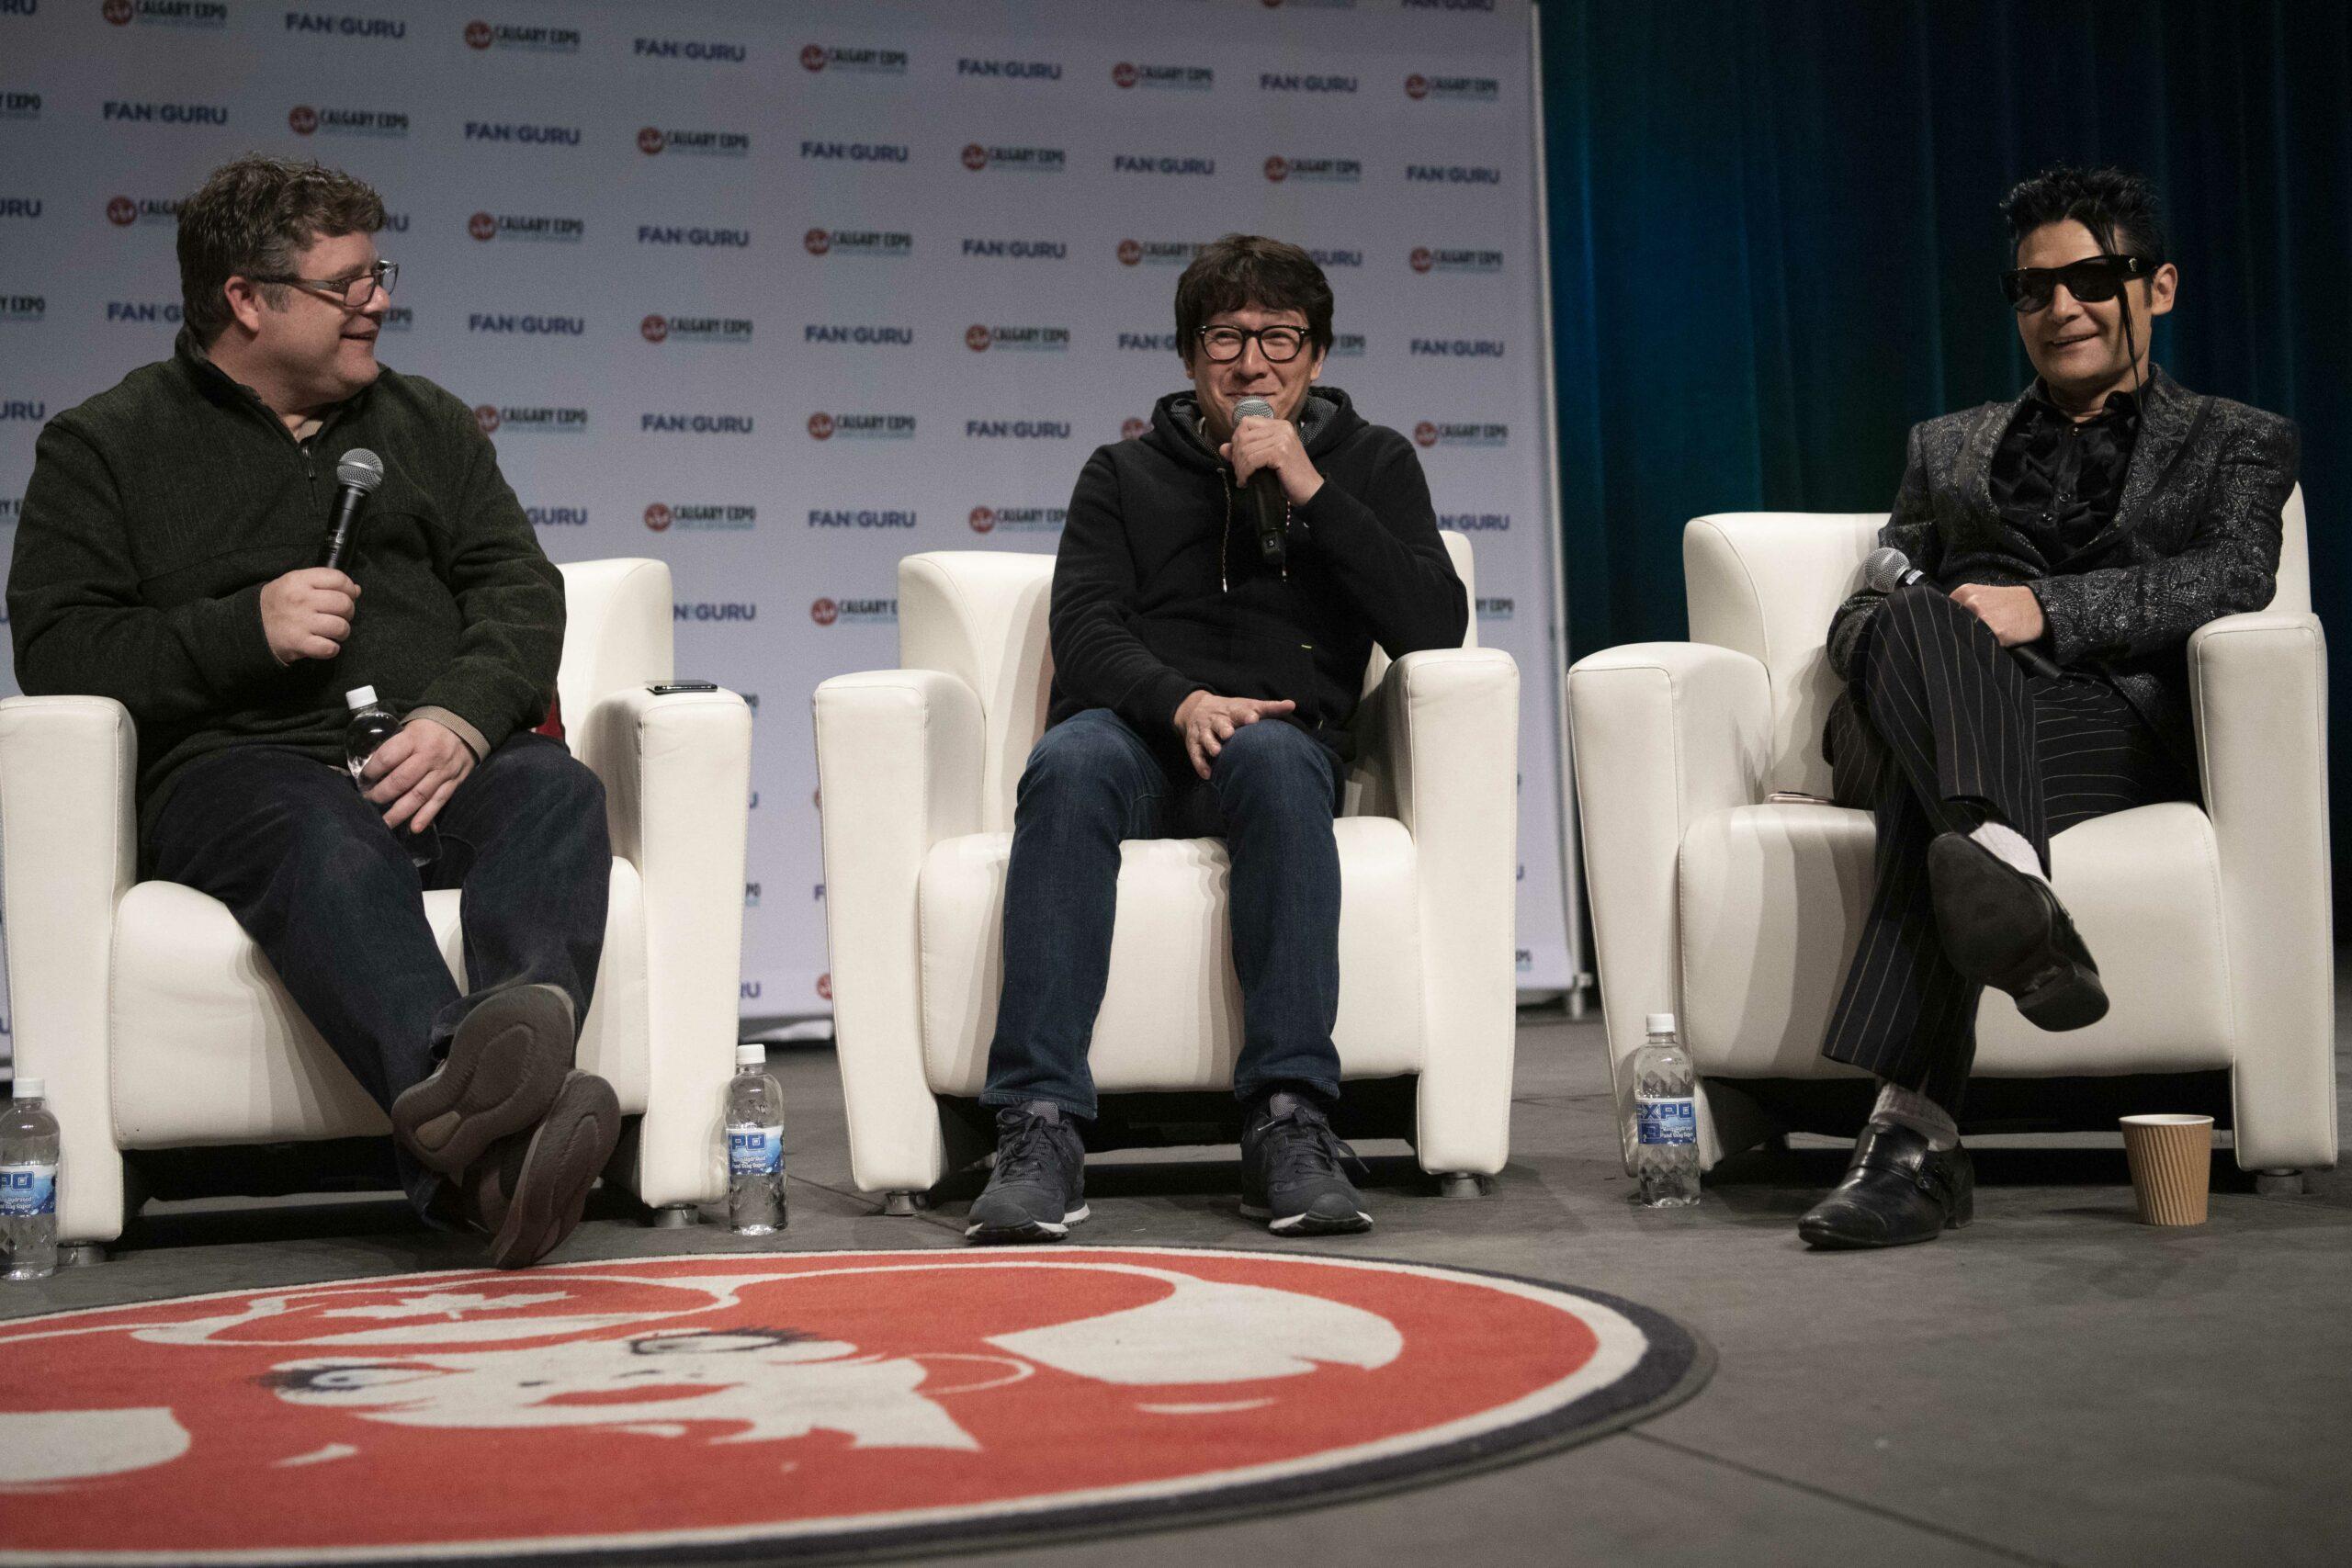 The Goonies reunite at Calgary Comic and Entertainment Expo